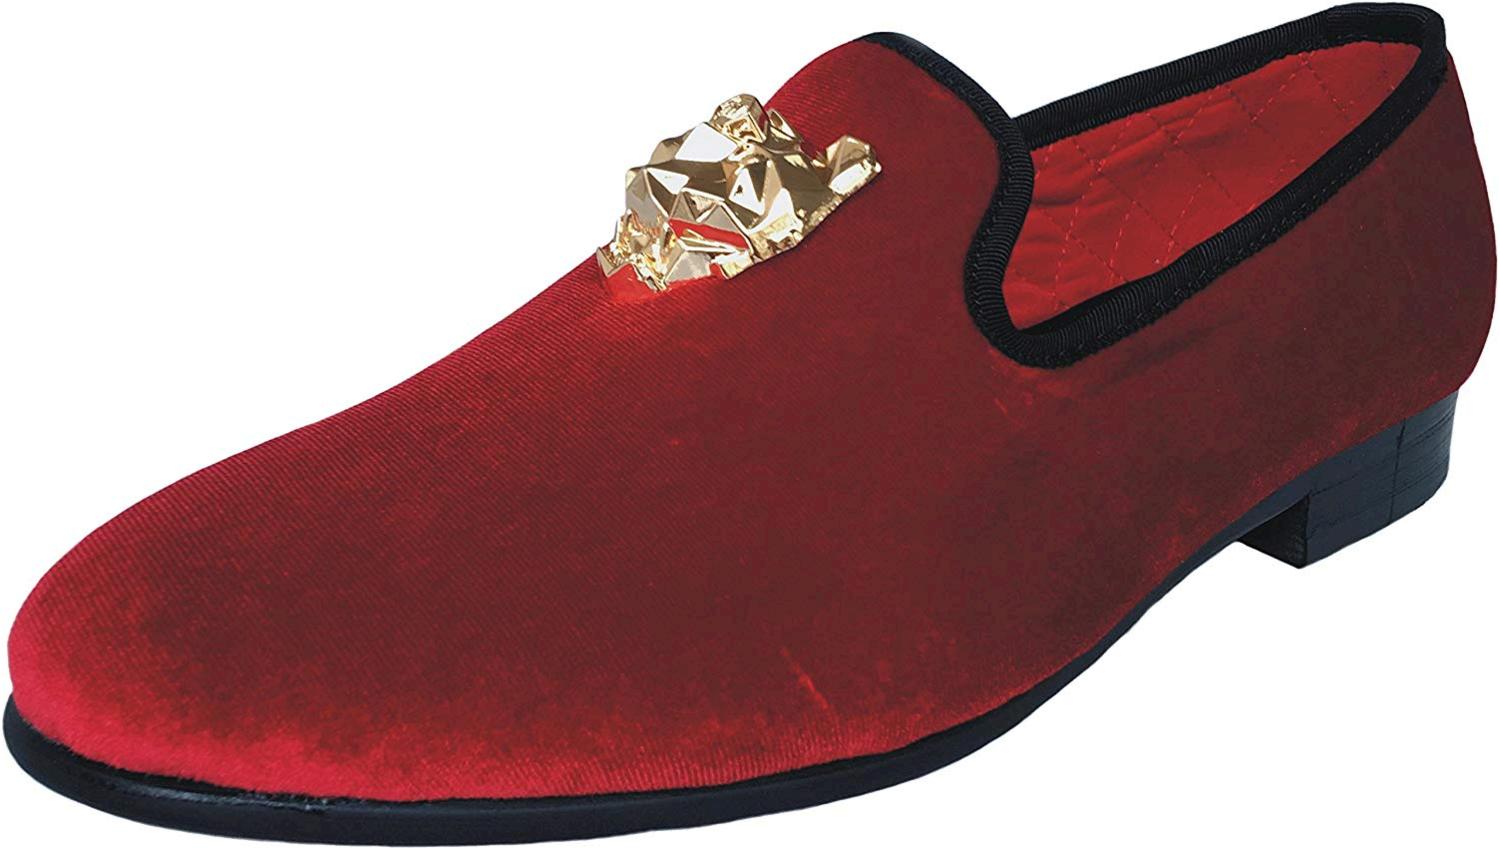 red and gold mens dress shoes